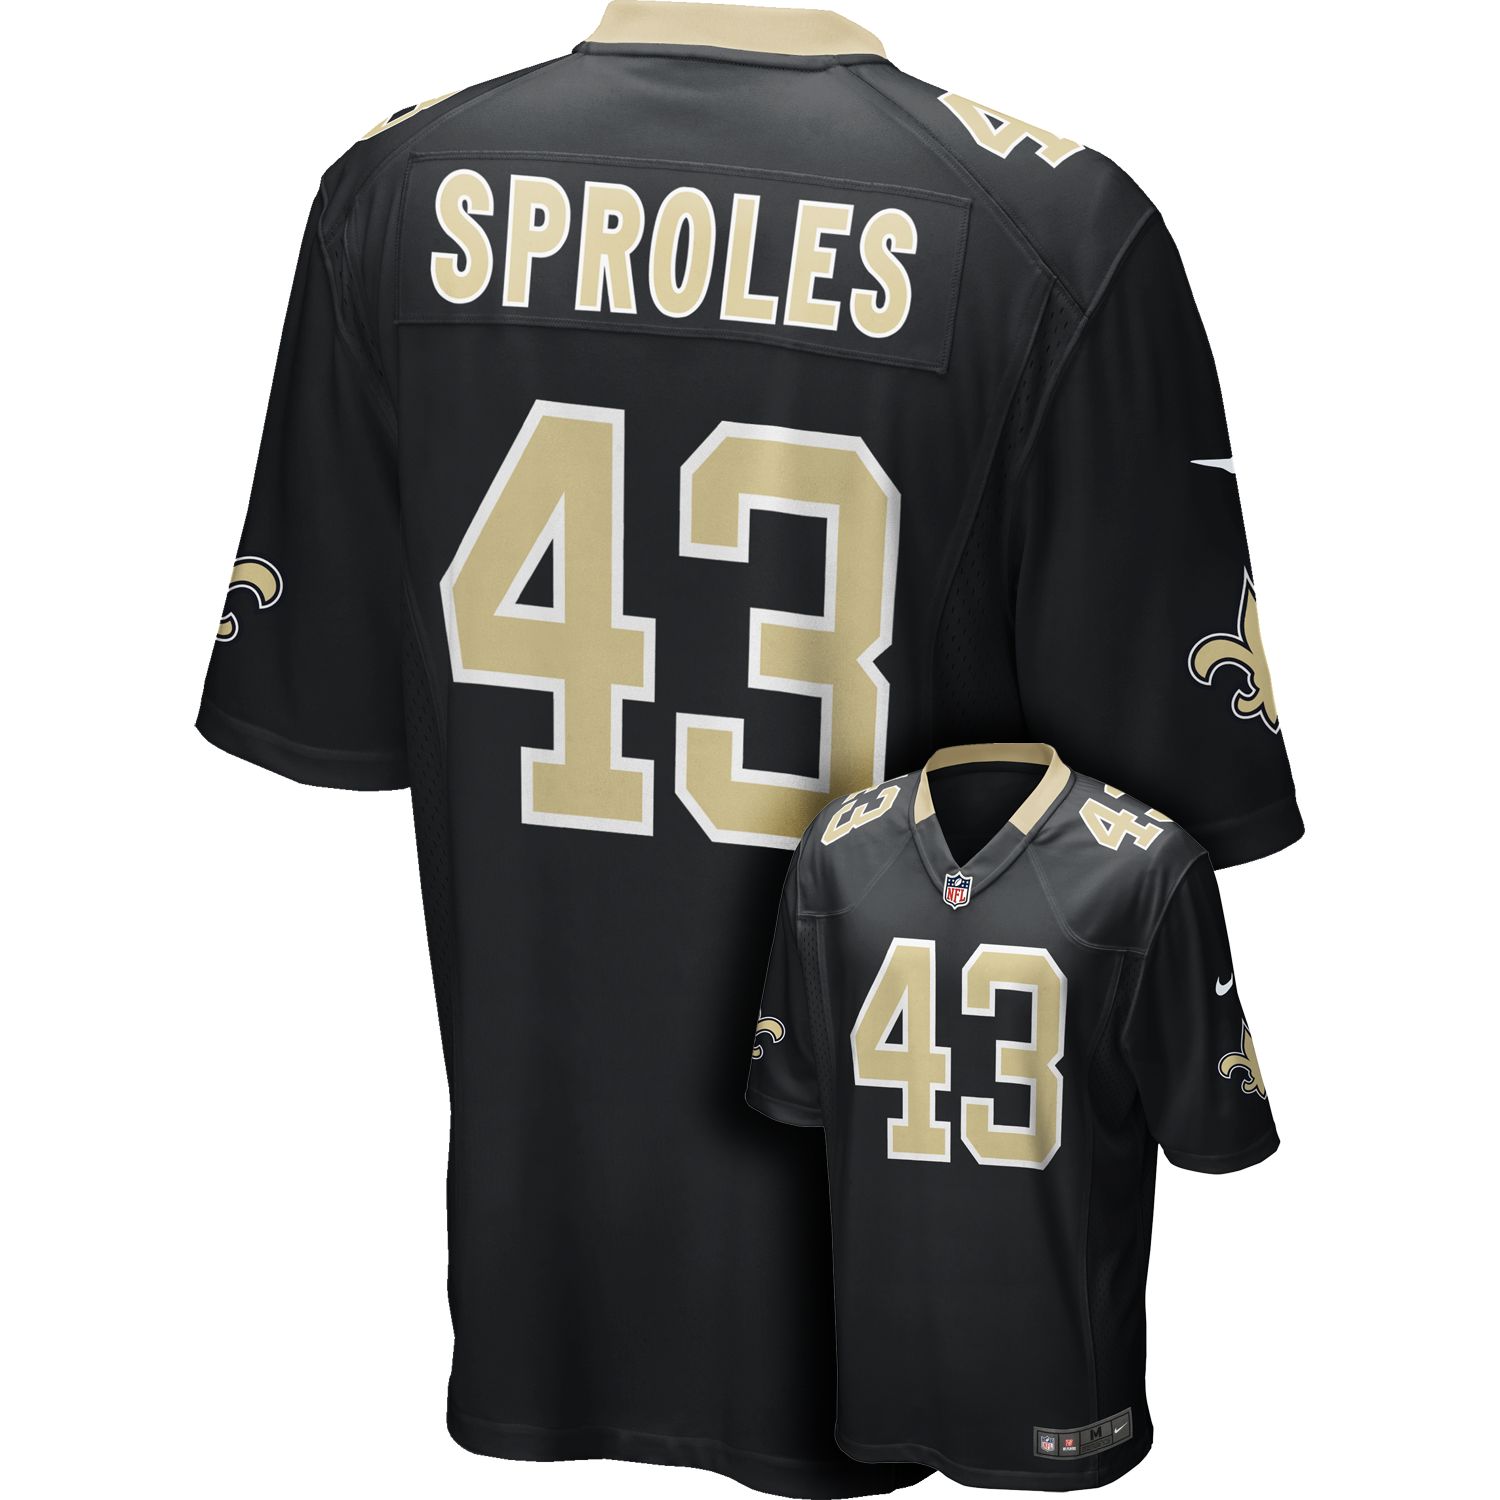 nfl sproles jersey